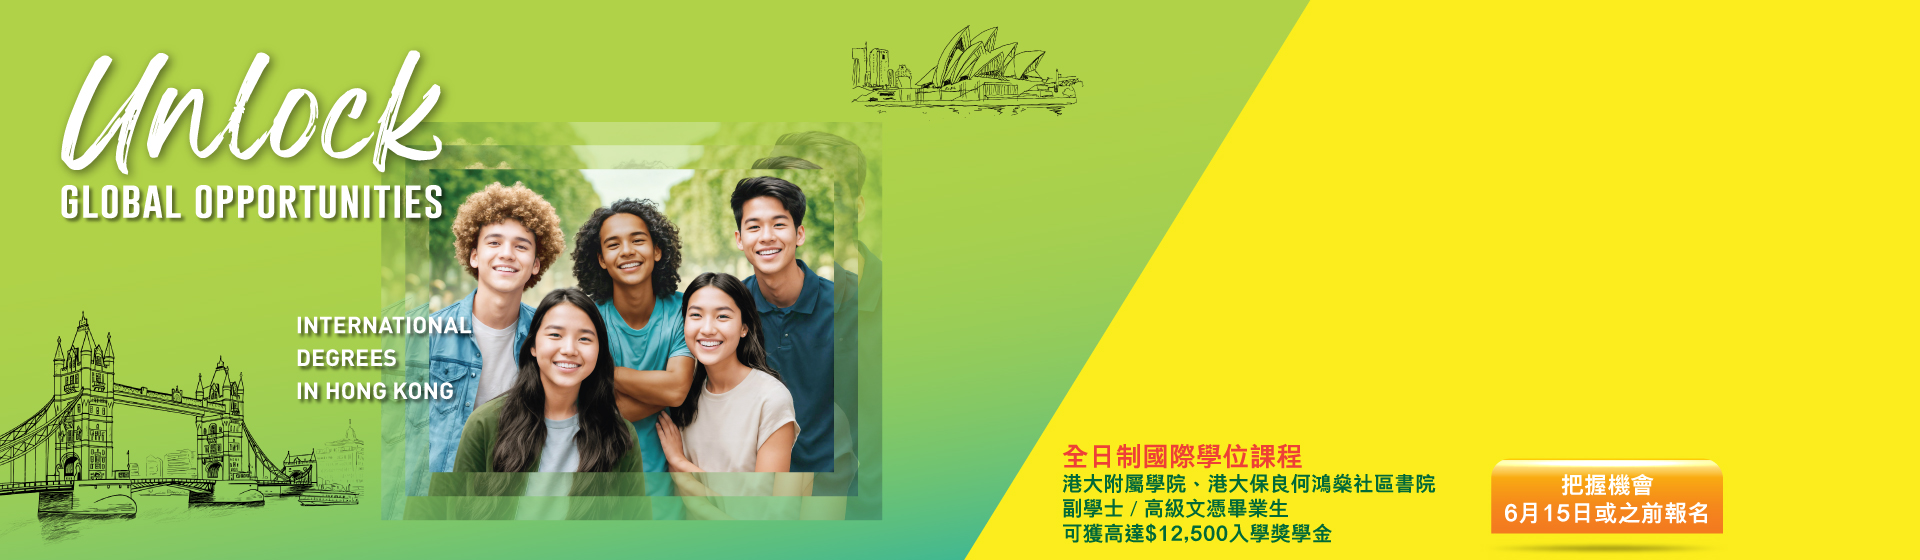 HKU SPACE IC Entry Scholarships up to HK$12,500!! [Application Deadline: 15/6]